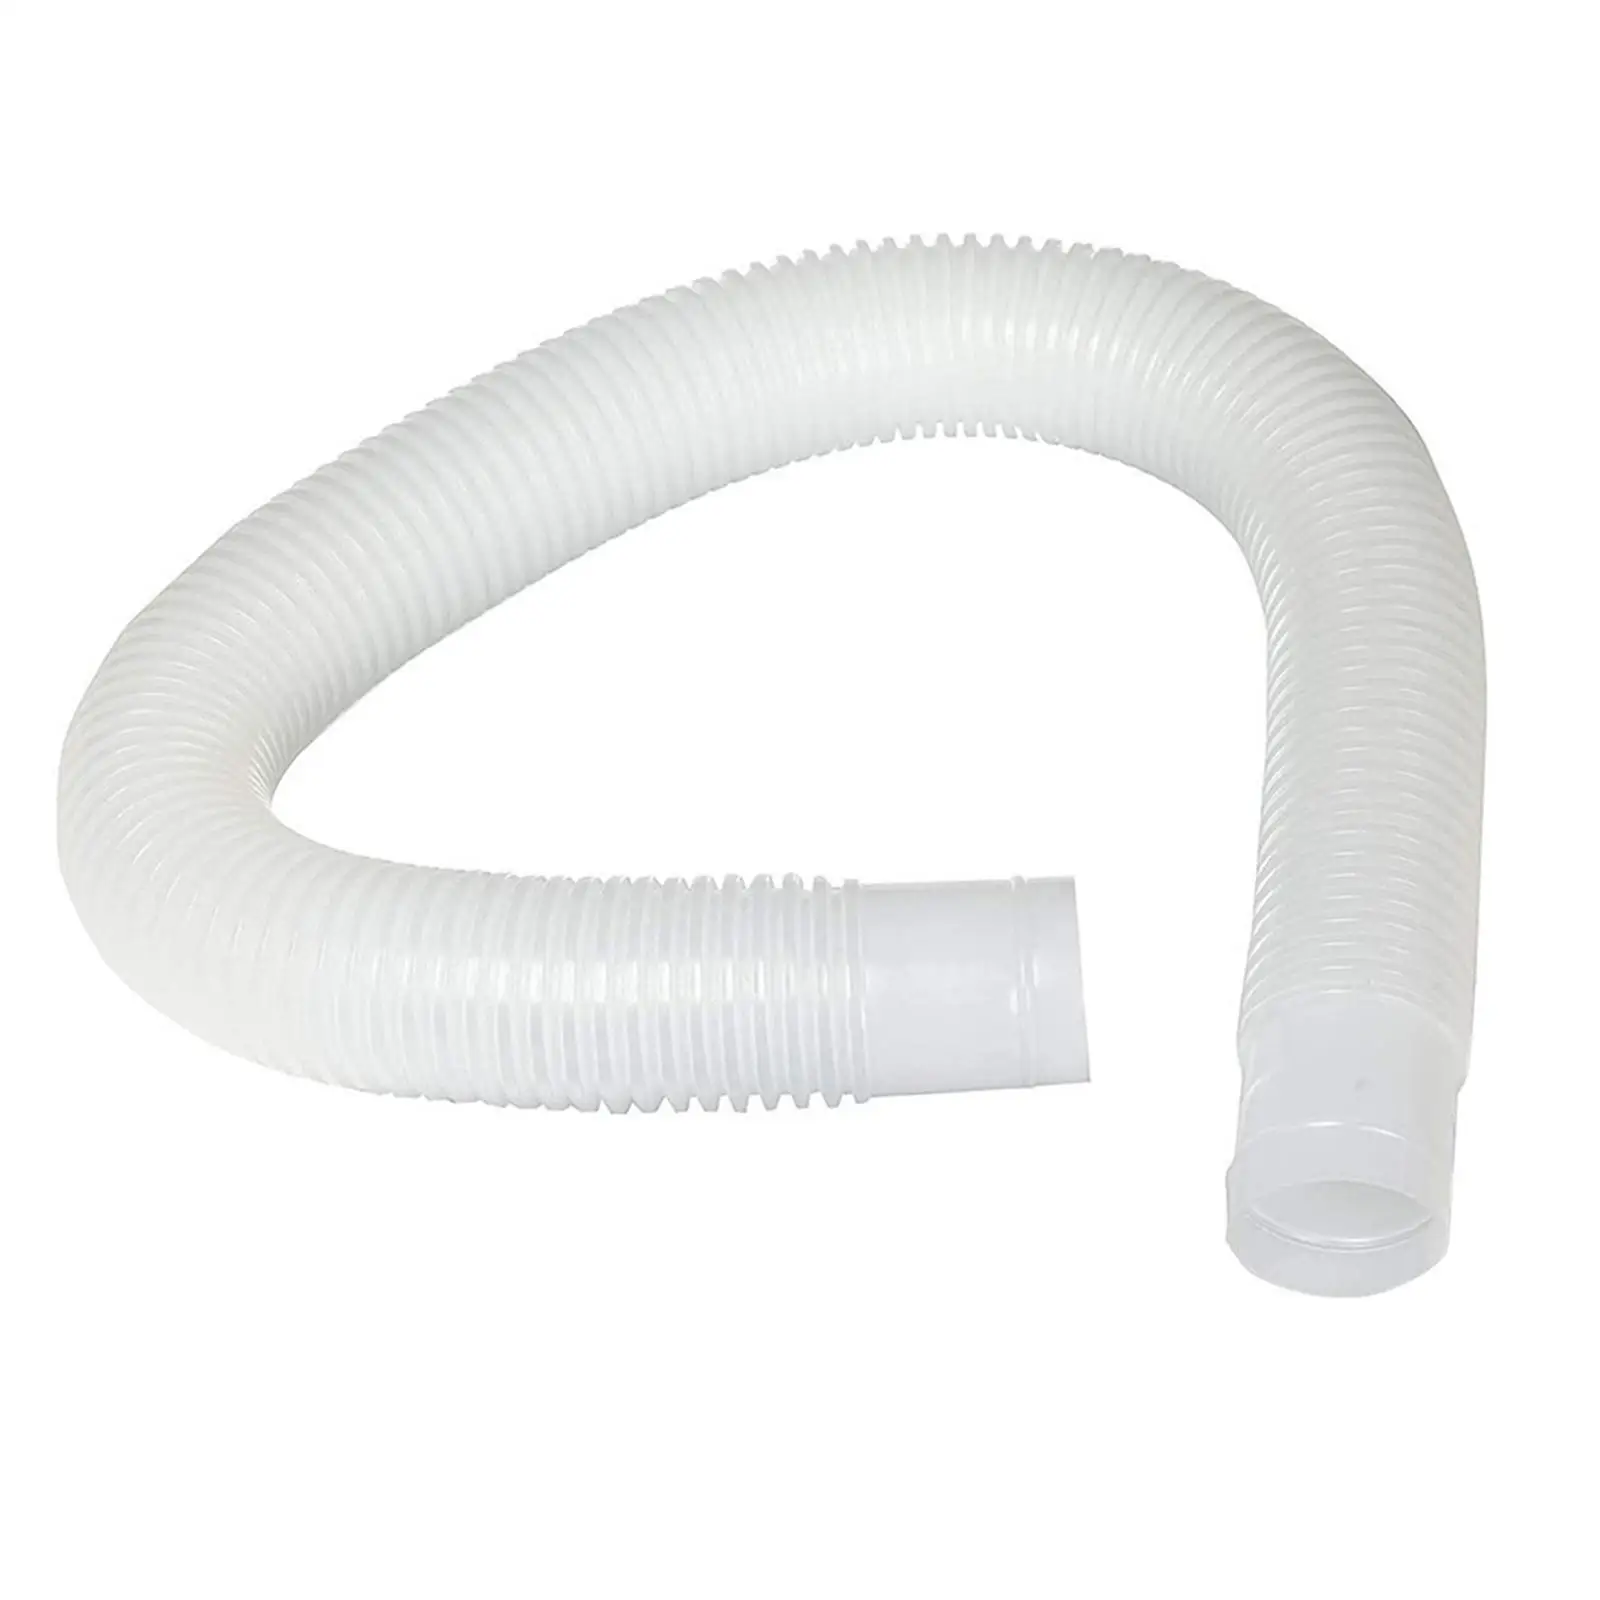 

Pools Skimmer Hose Durable Accessory Flexible Surface Skimmer Replacement Hose Pools Water Inlet Pipe Strainer Replacement Hose